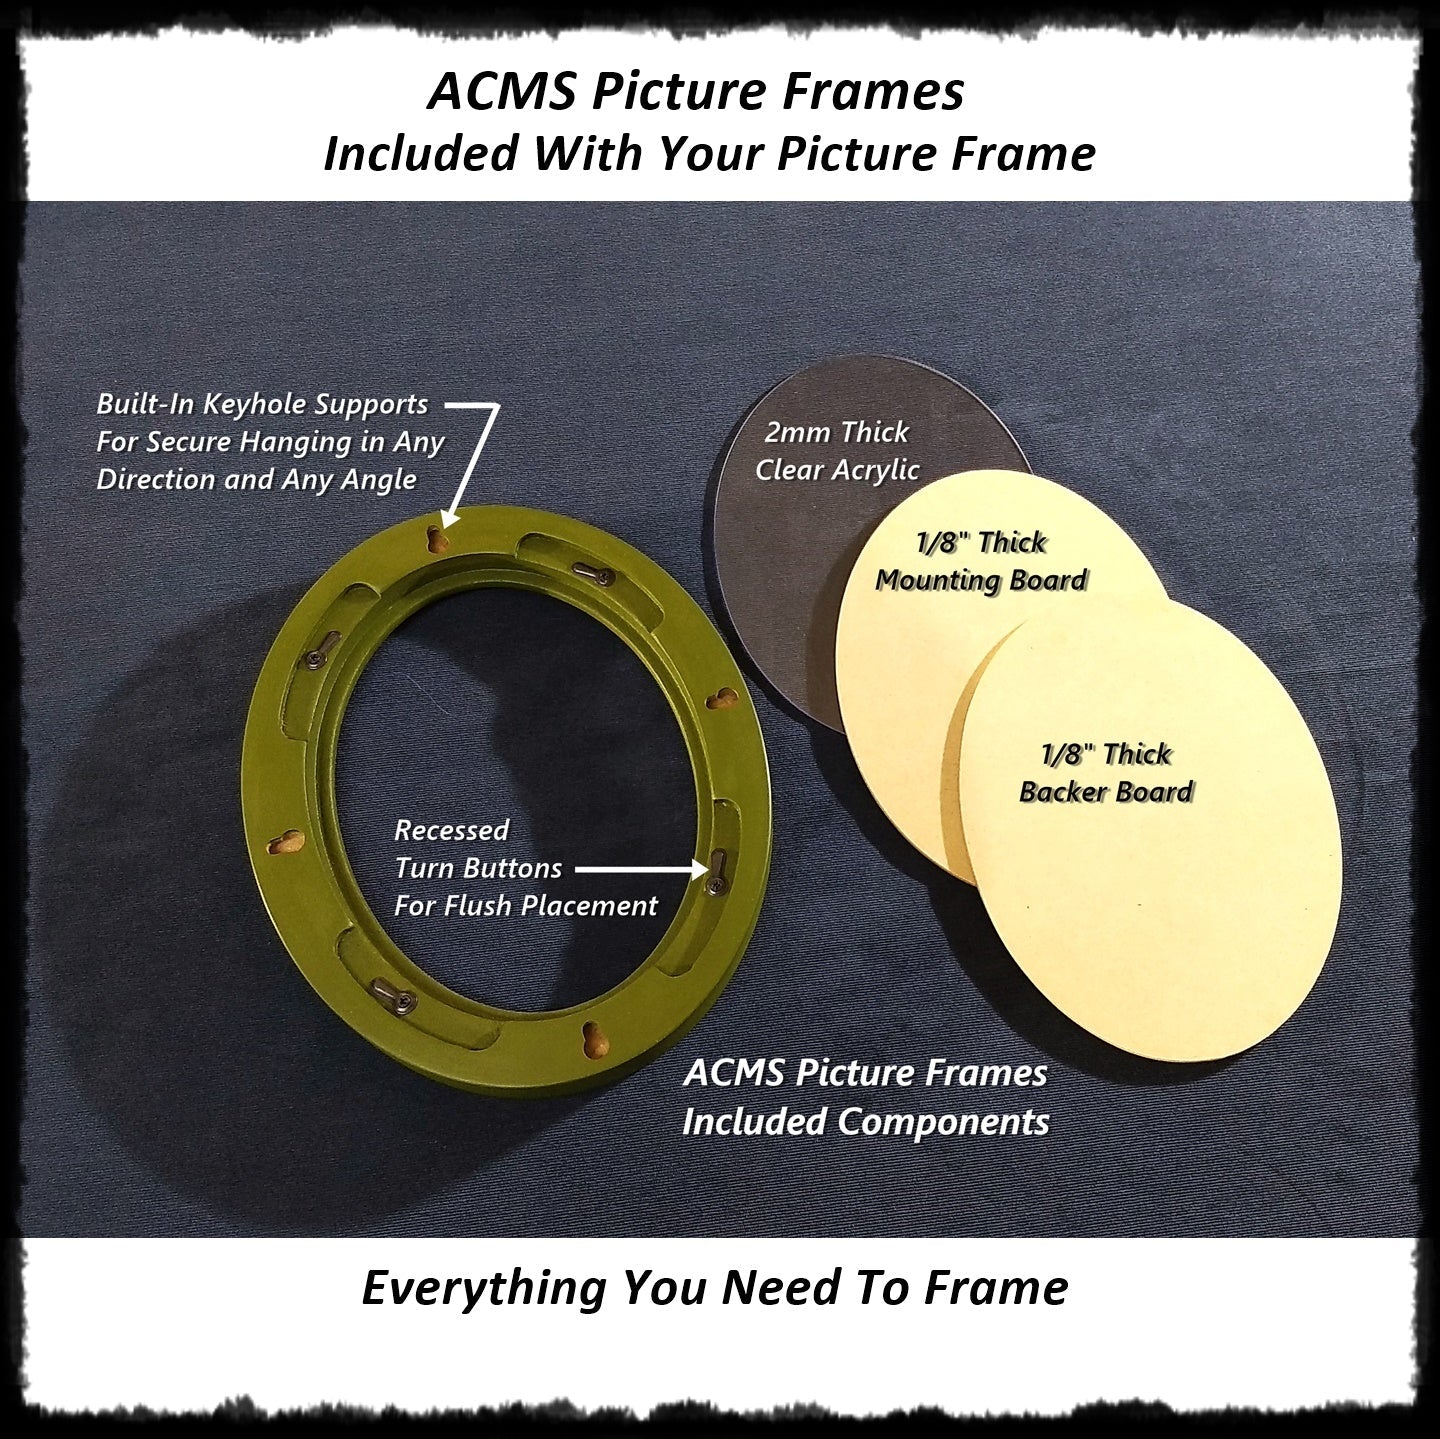 Oval Picture  Frame - Flat Profile - 1.25" Frame Width